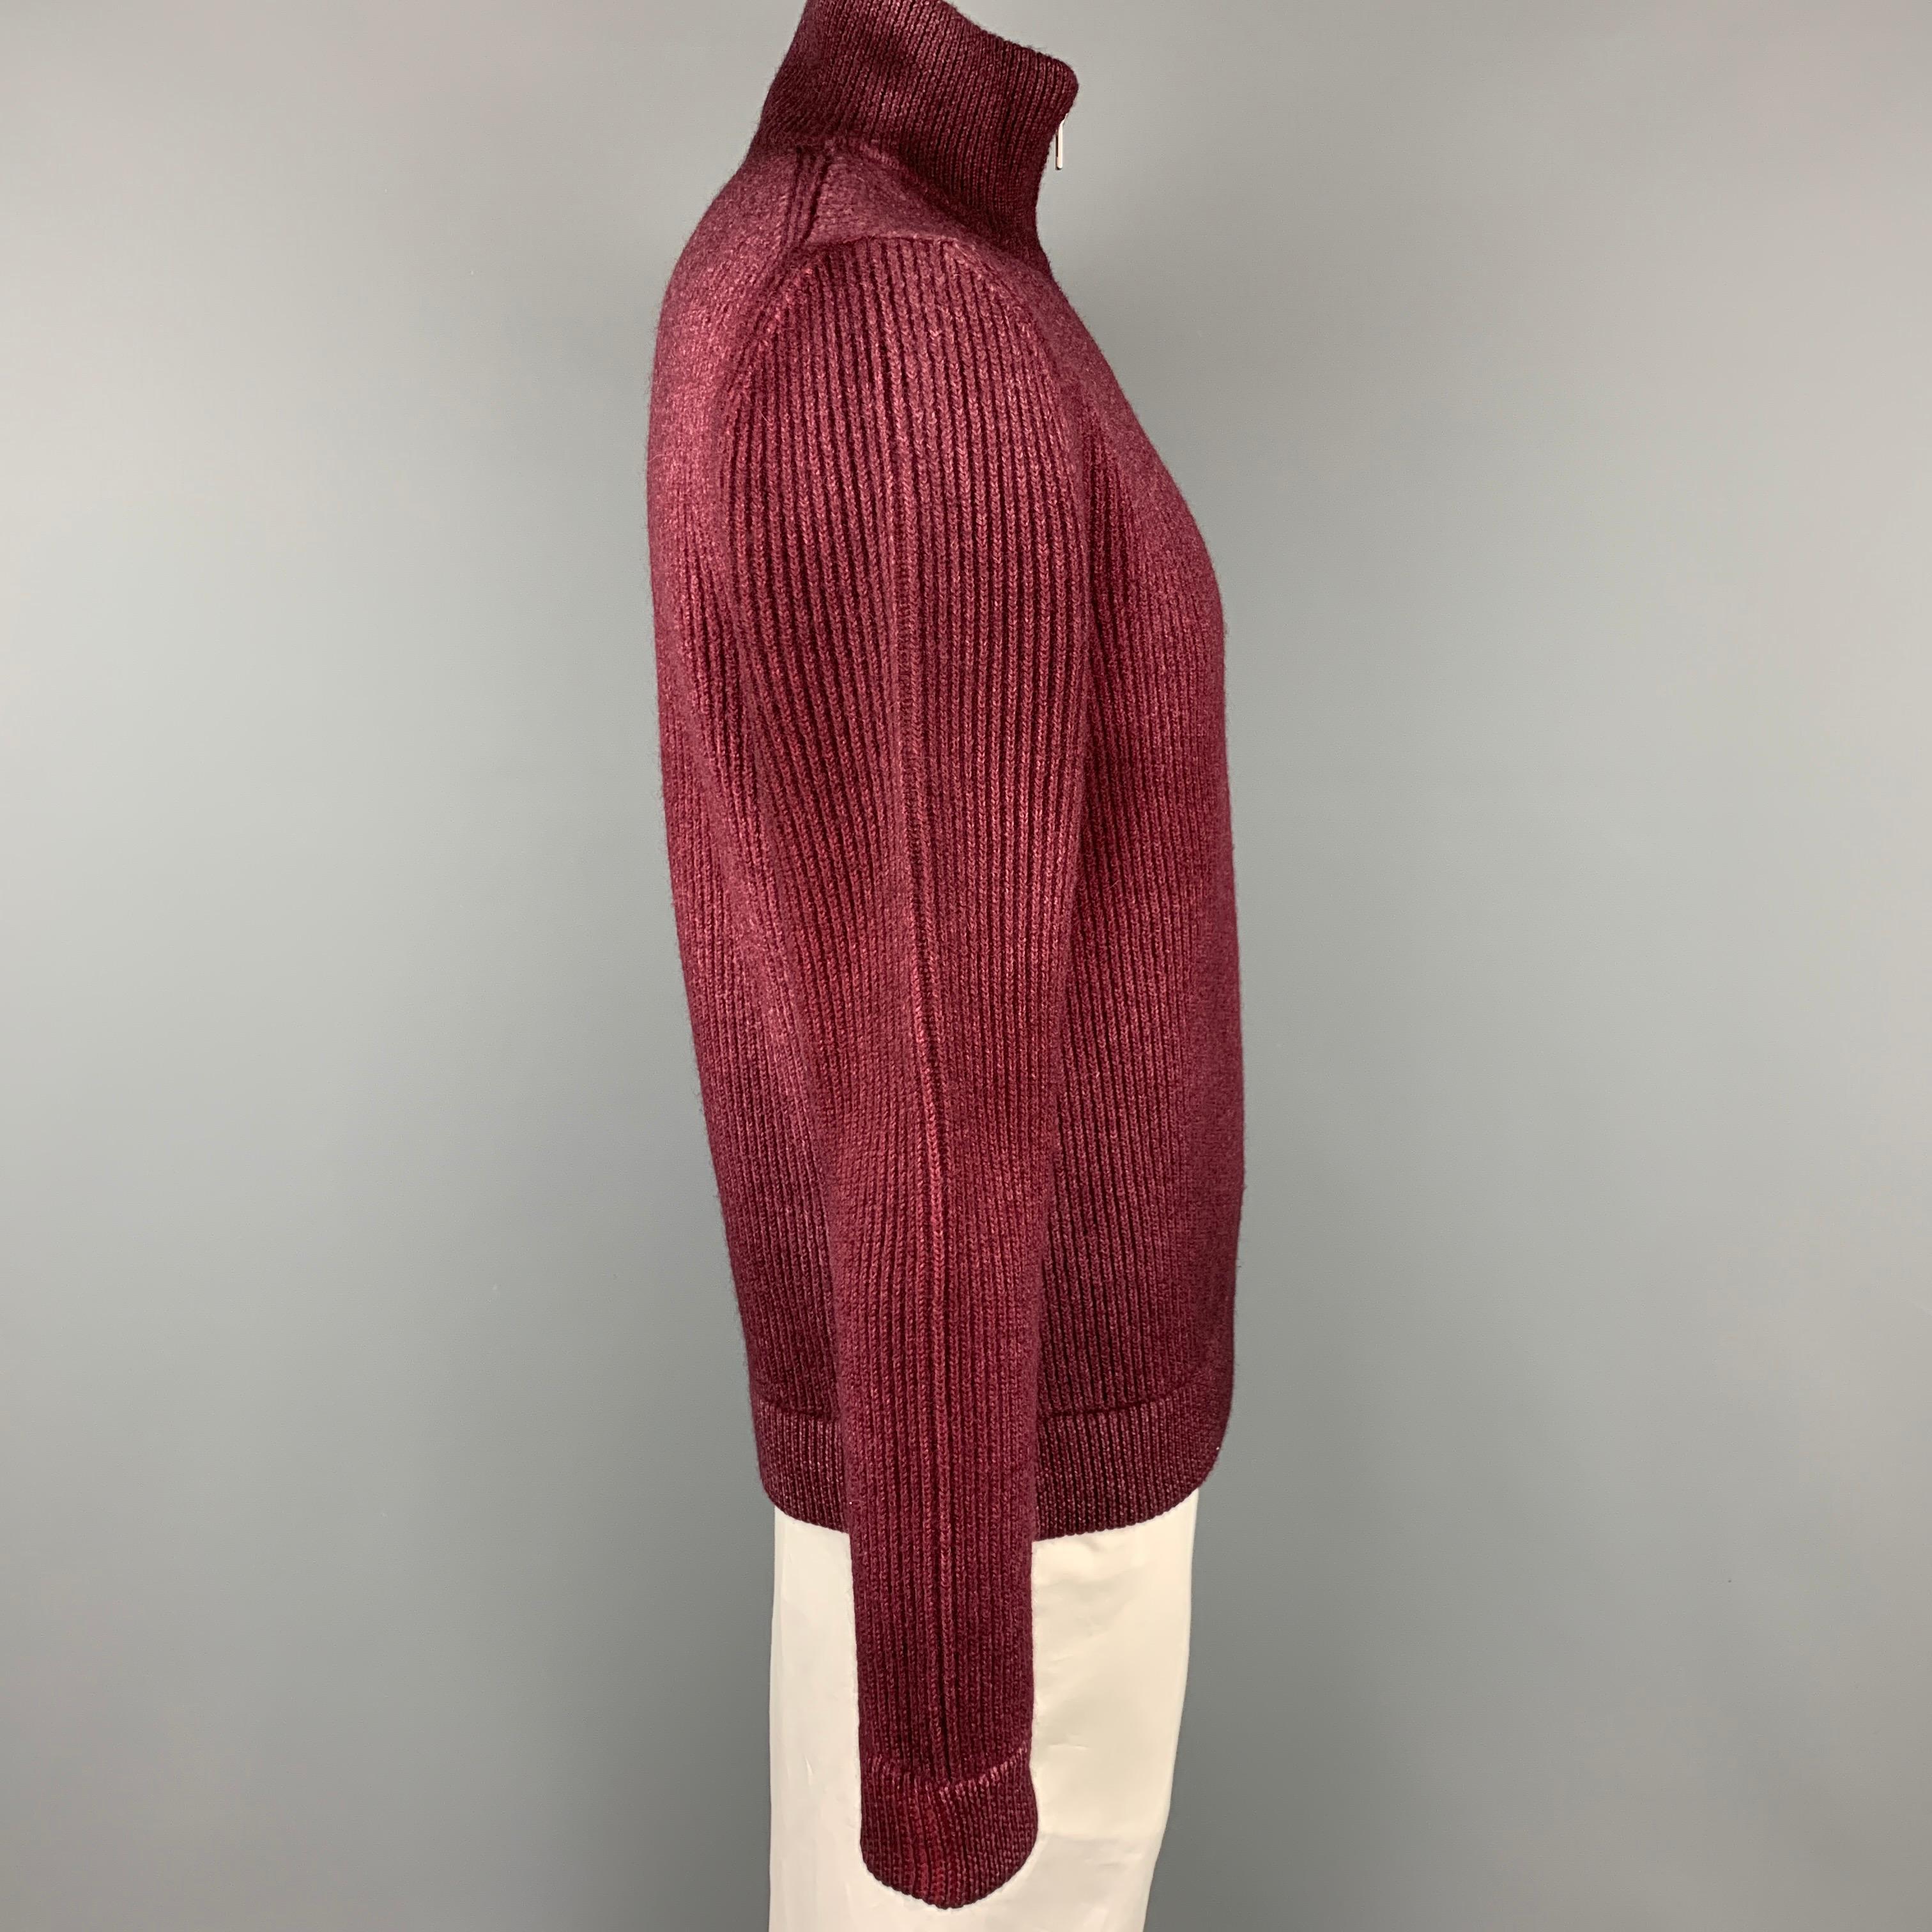 MAISON MARGIELA cardigan sweater jacket comes in a burgundy knitted wool featuring a high collar and a full zip closure. Made in Italy. 

Excellent Pre-Owned Condition.
Marked: L

Measurements:

Shoulder: 17 in.
Chest: 42 in.
Sleeve: 28.5